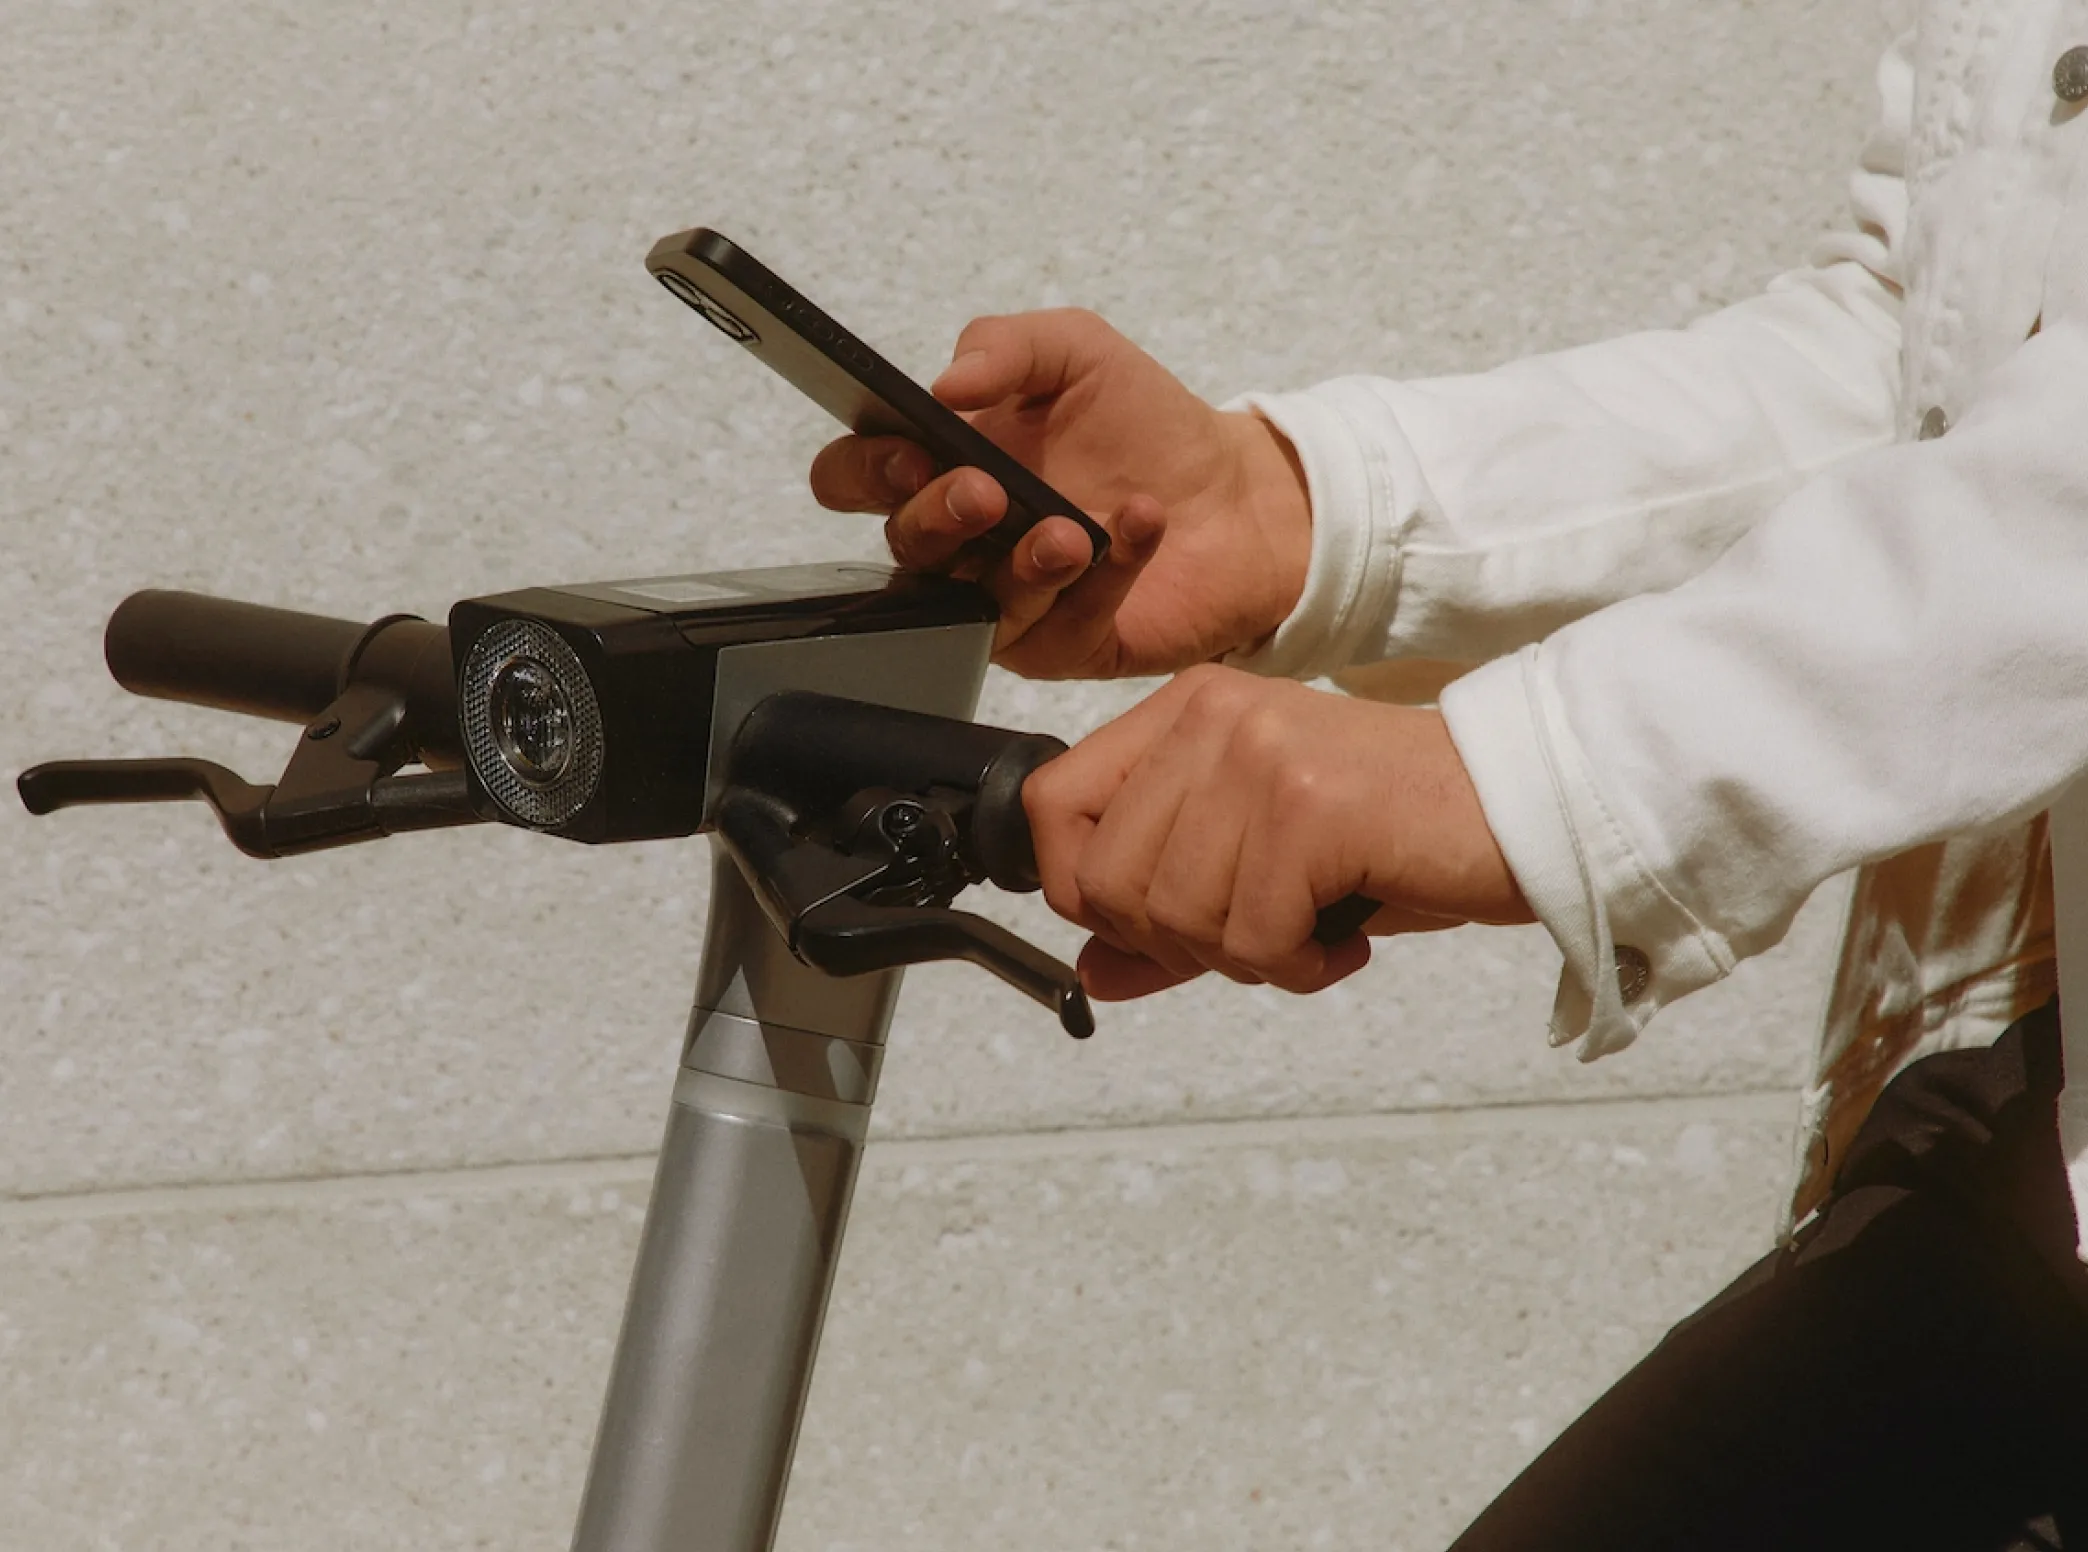 a person on a bike using a cell phone